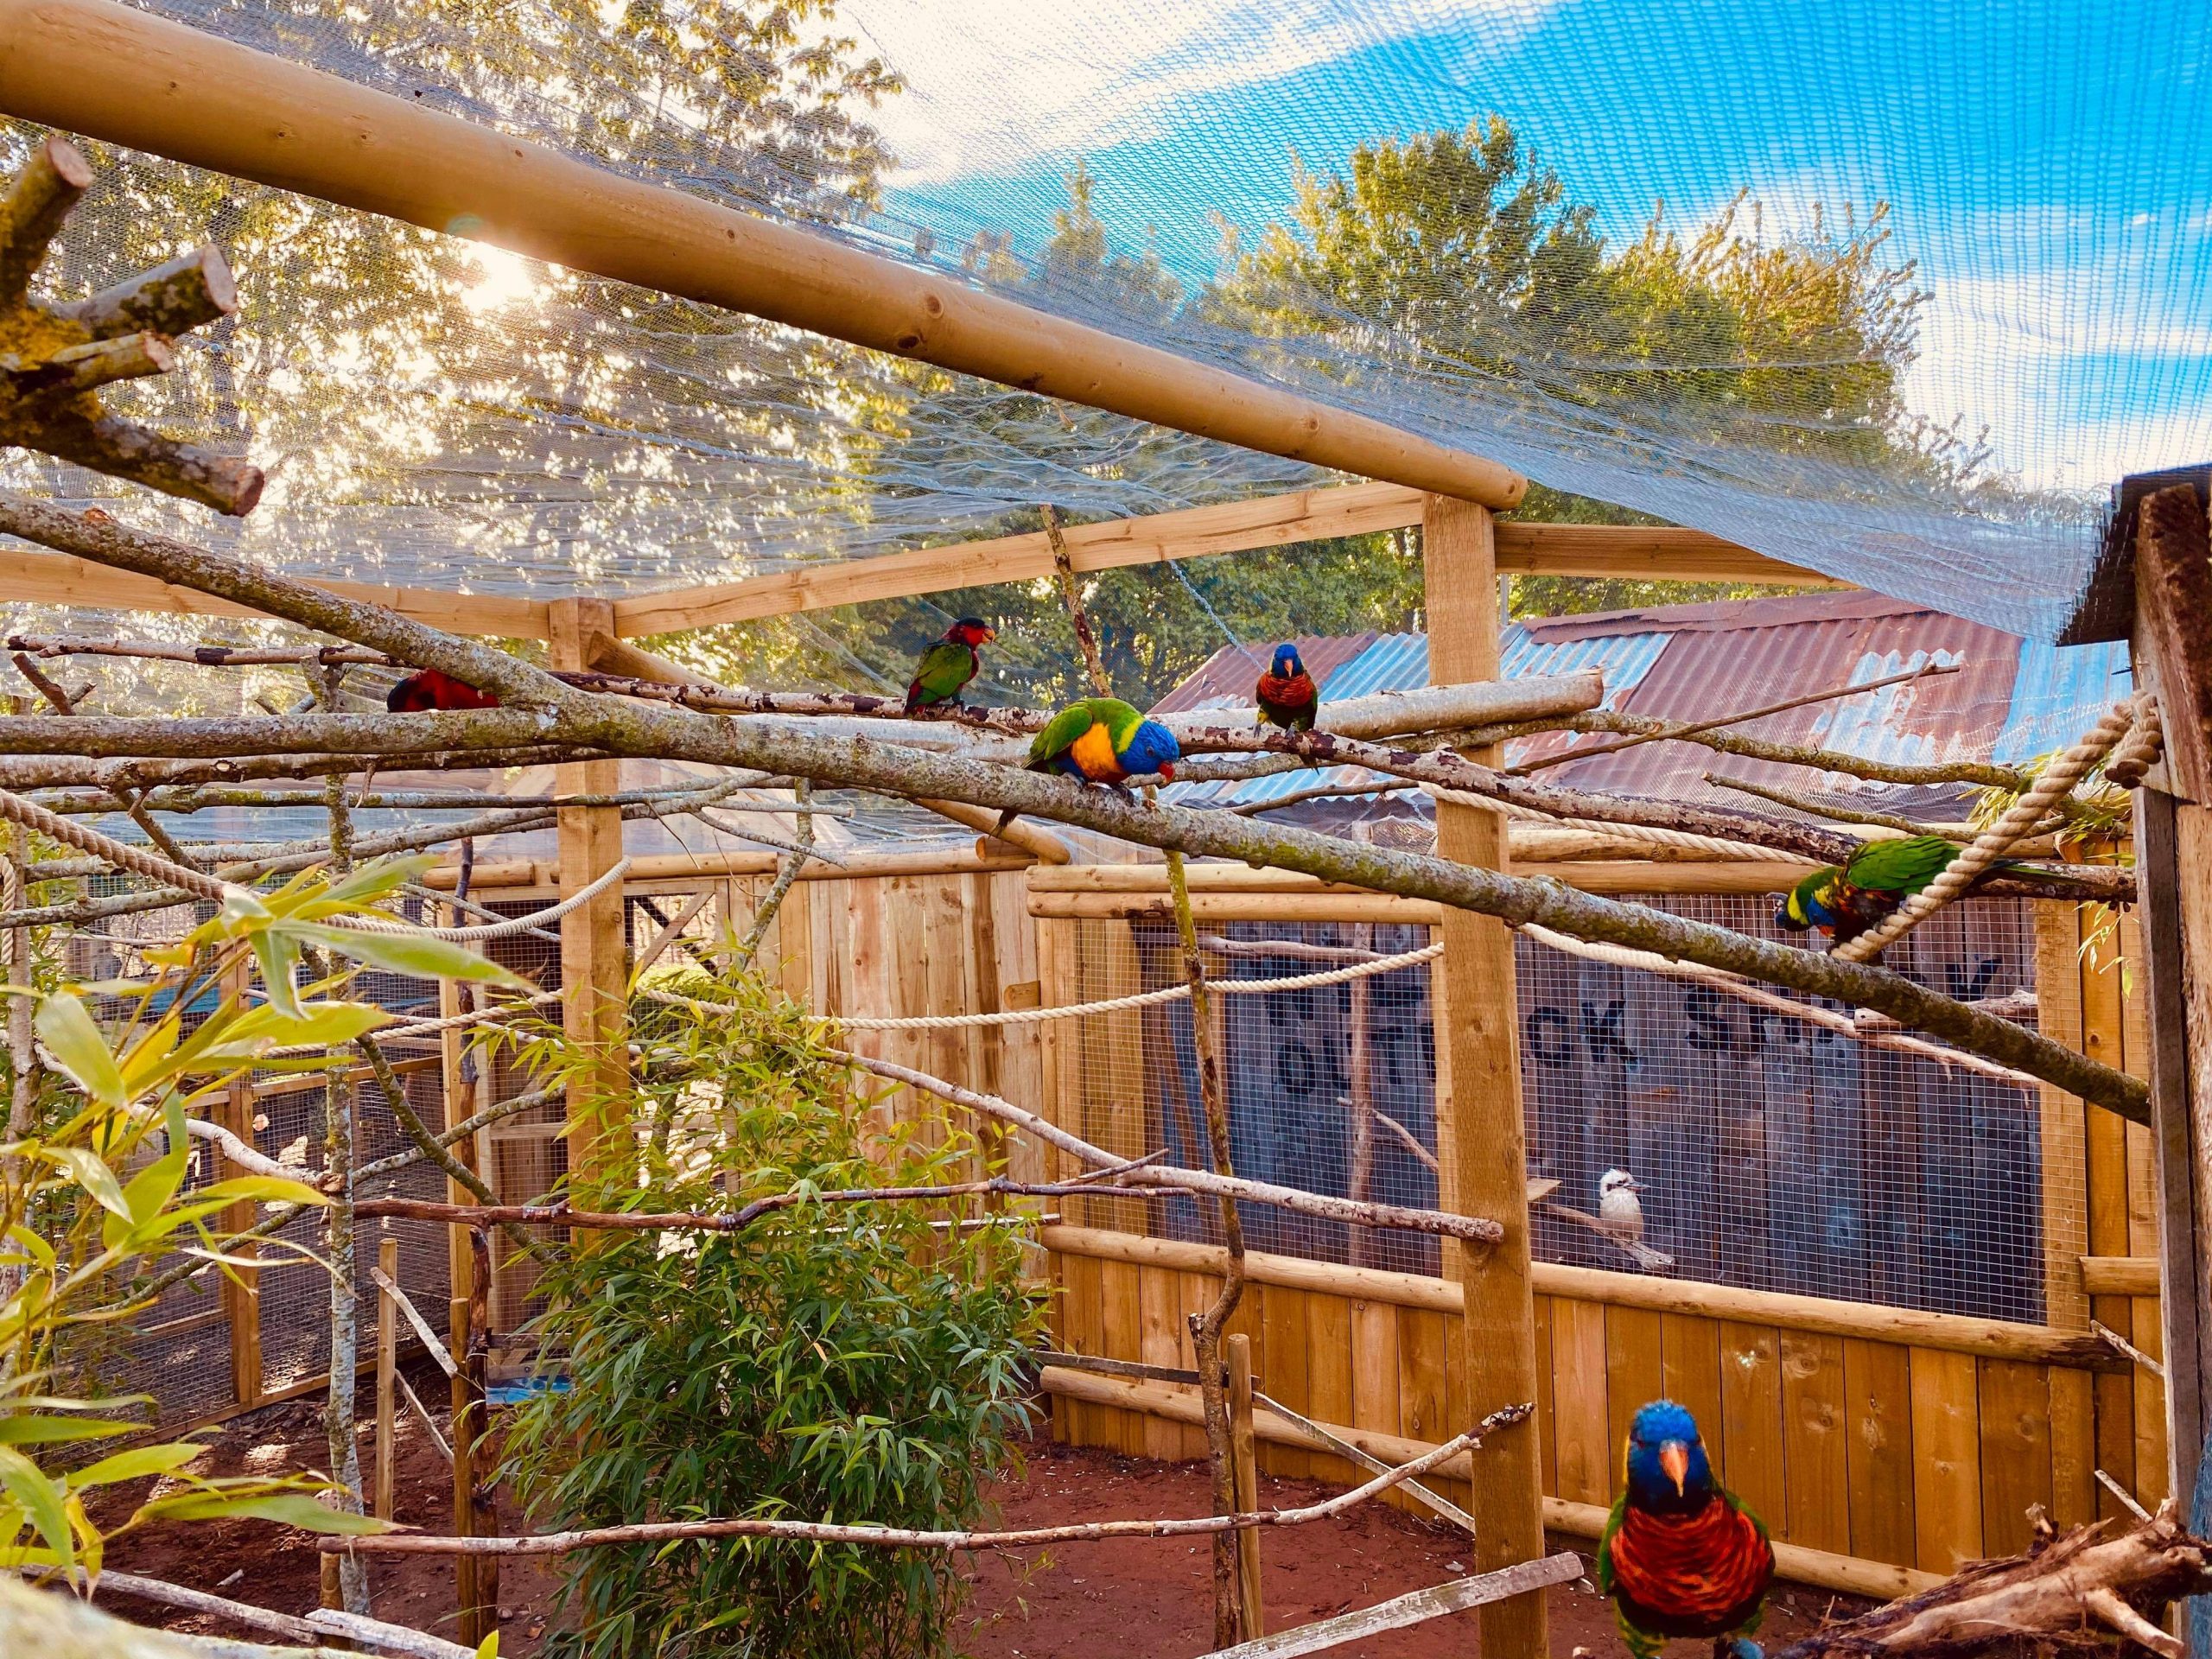 Mesh roof on zoo enclosure for Lorikeets